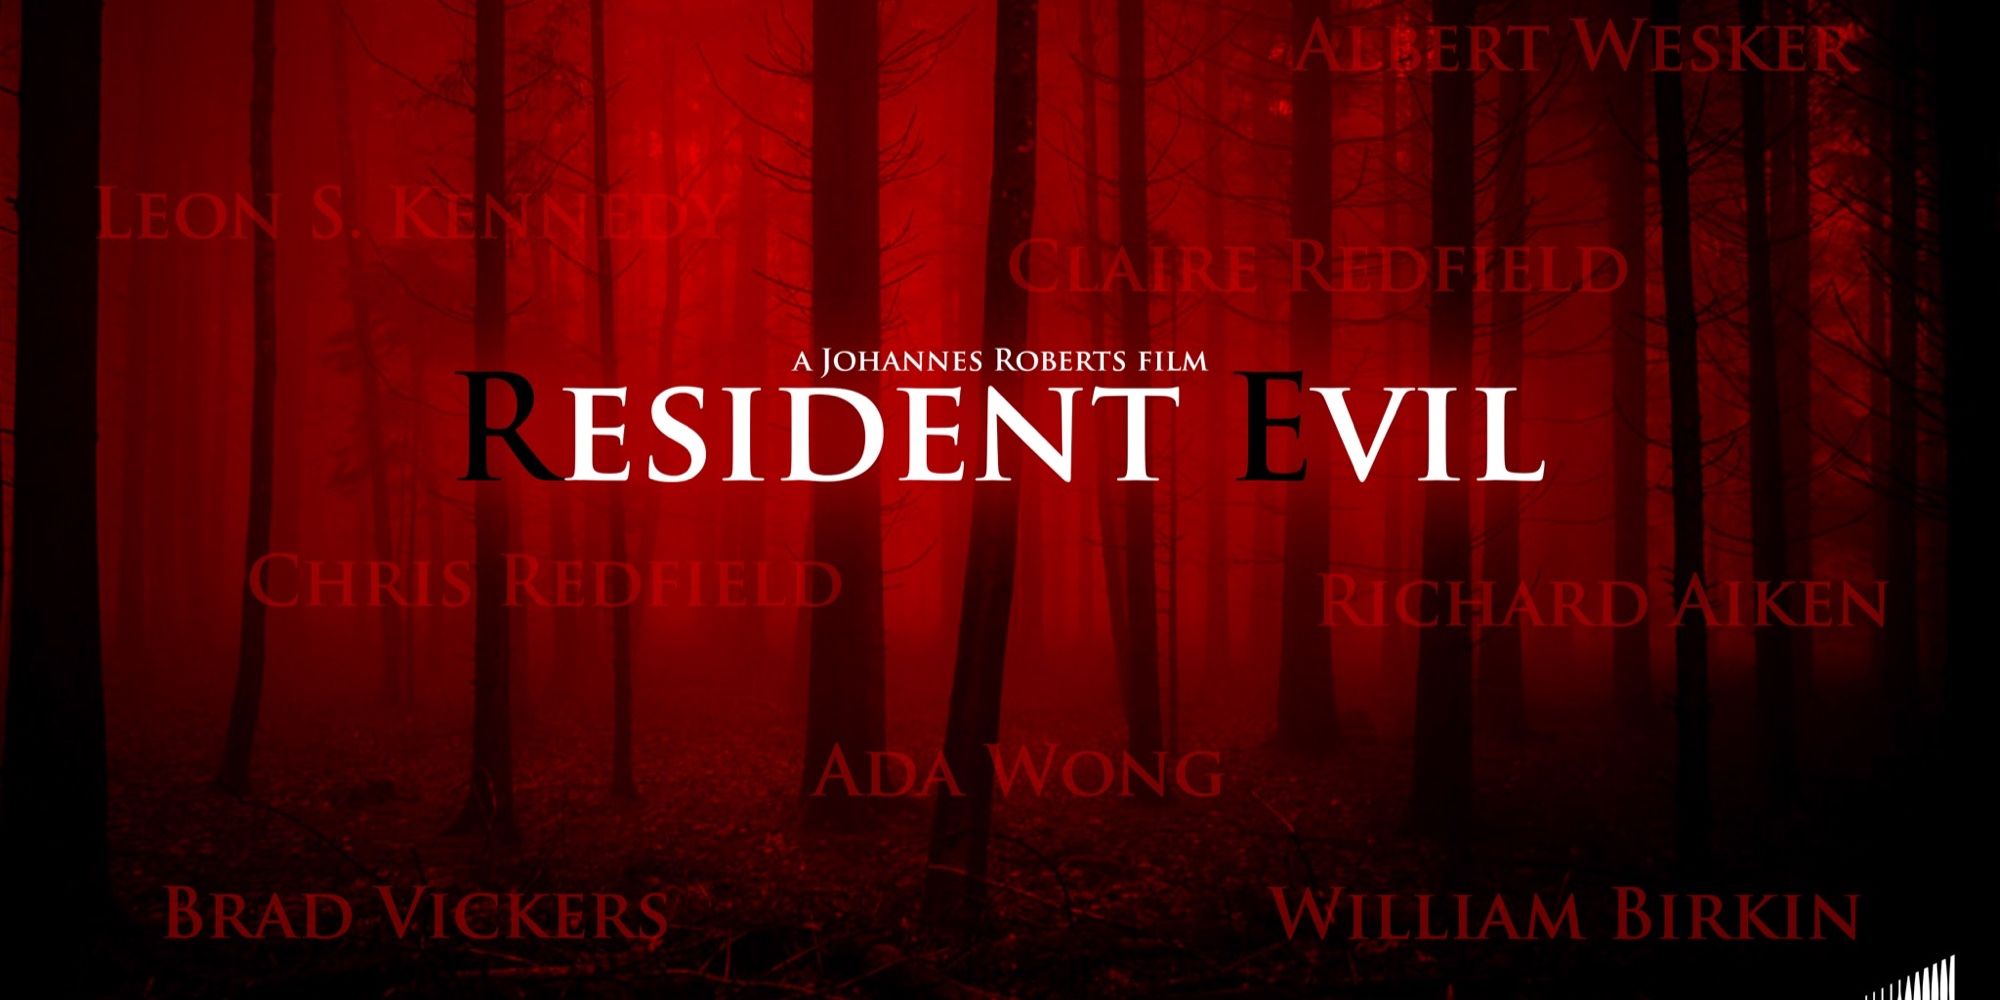 Resident Evil movie reboot poster cropped